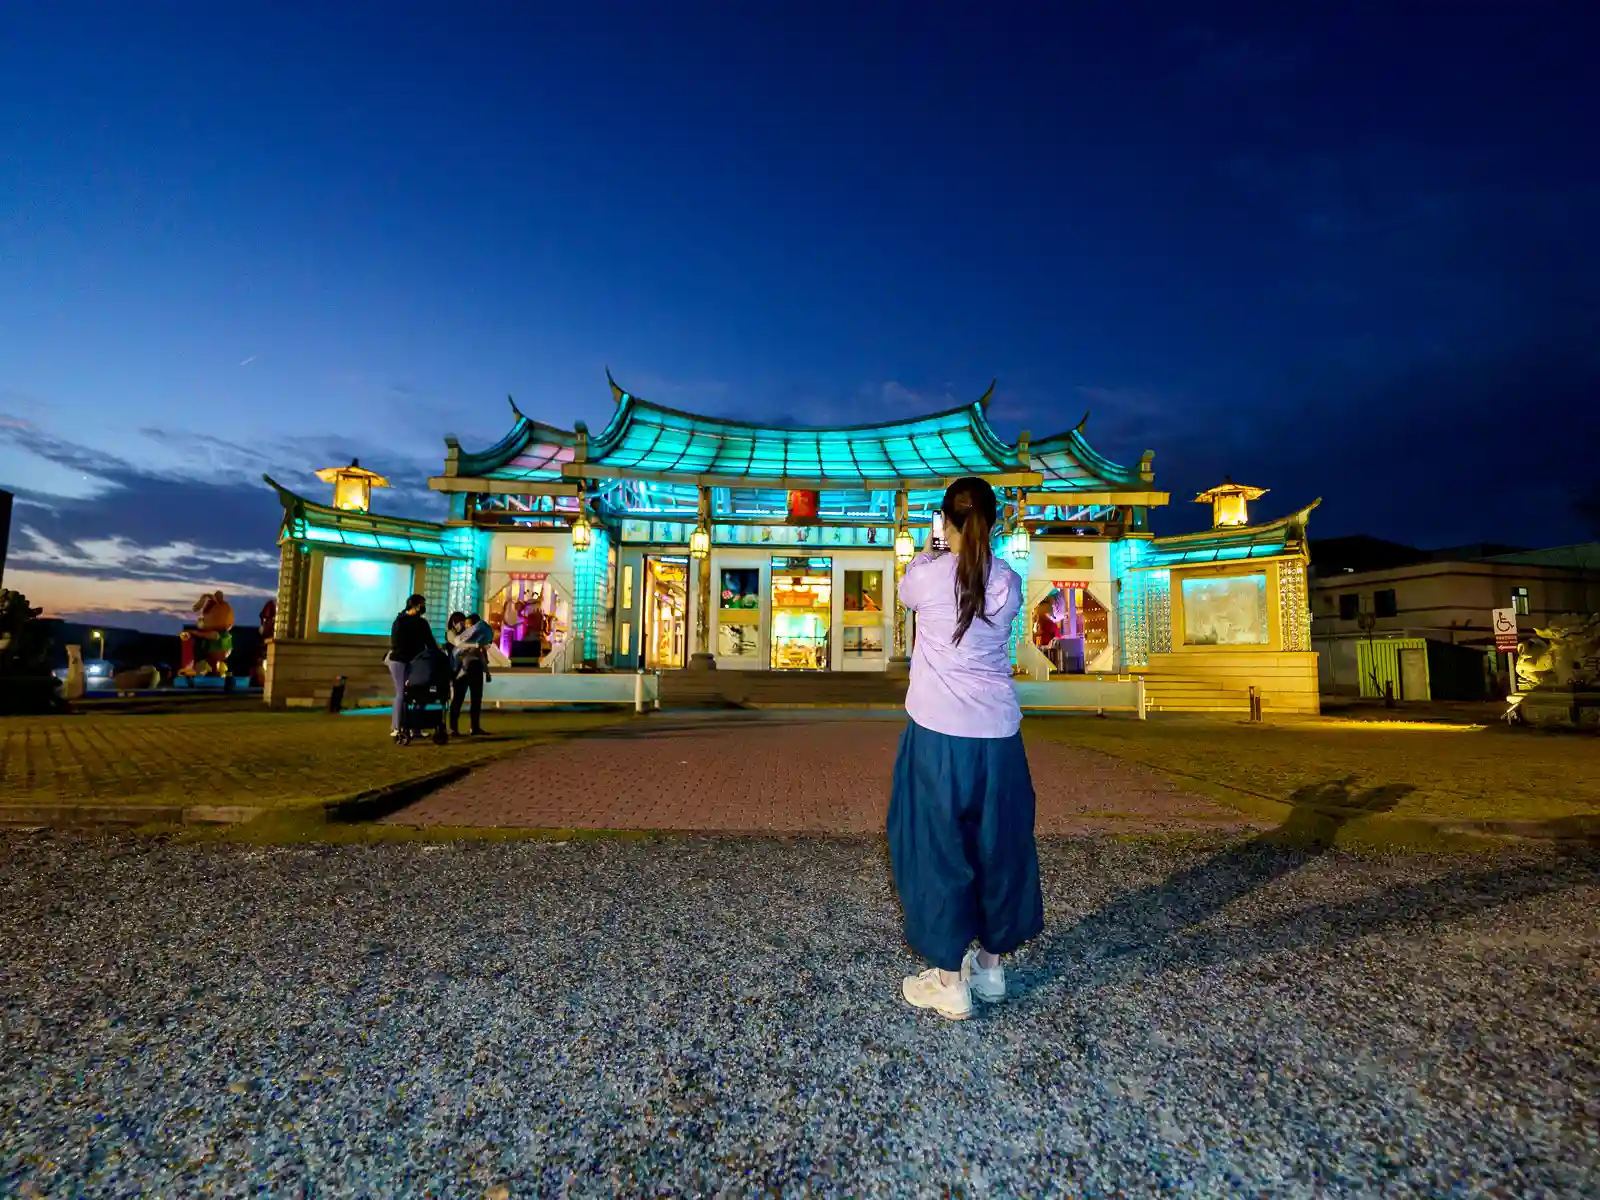 The illuminated Lukang Glass Temple seen from the outside at night.